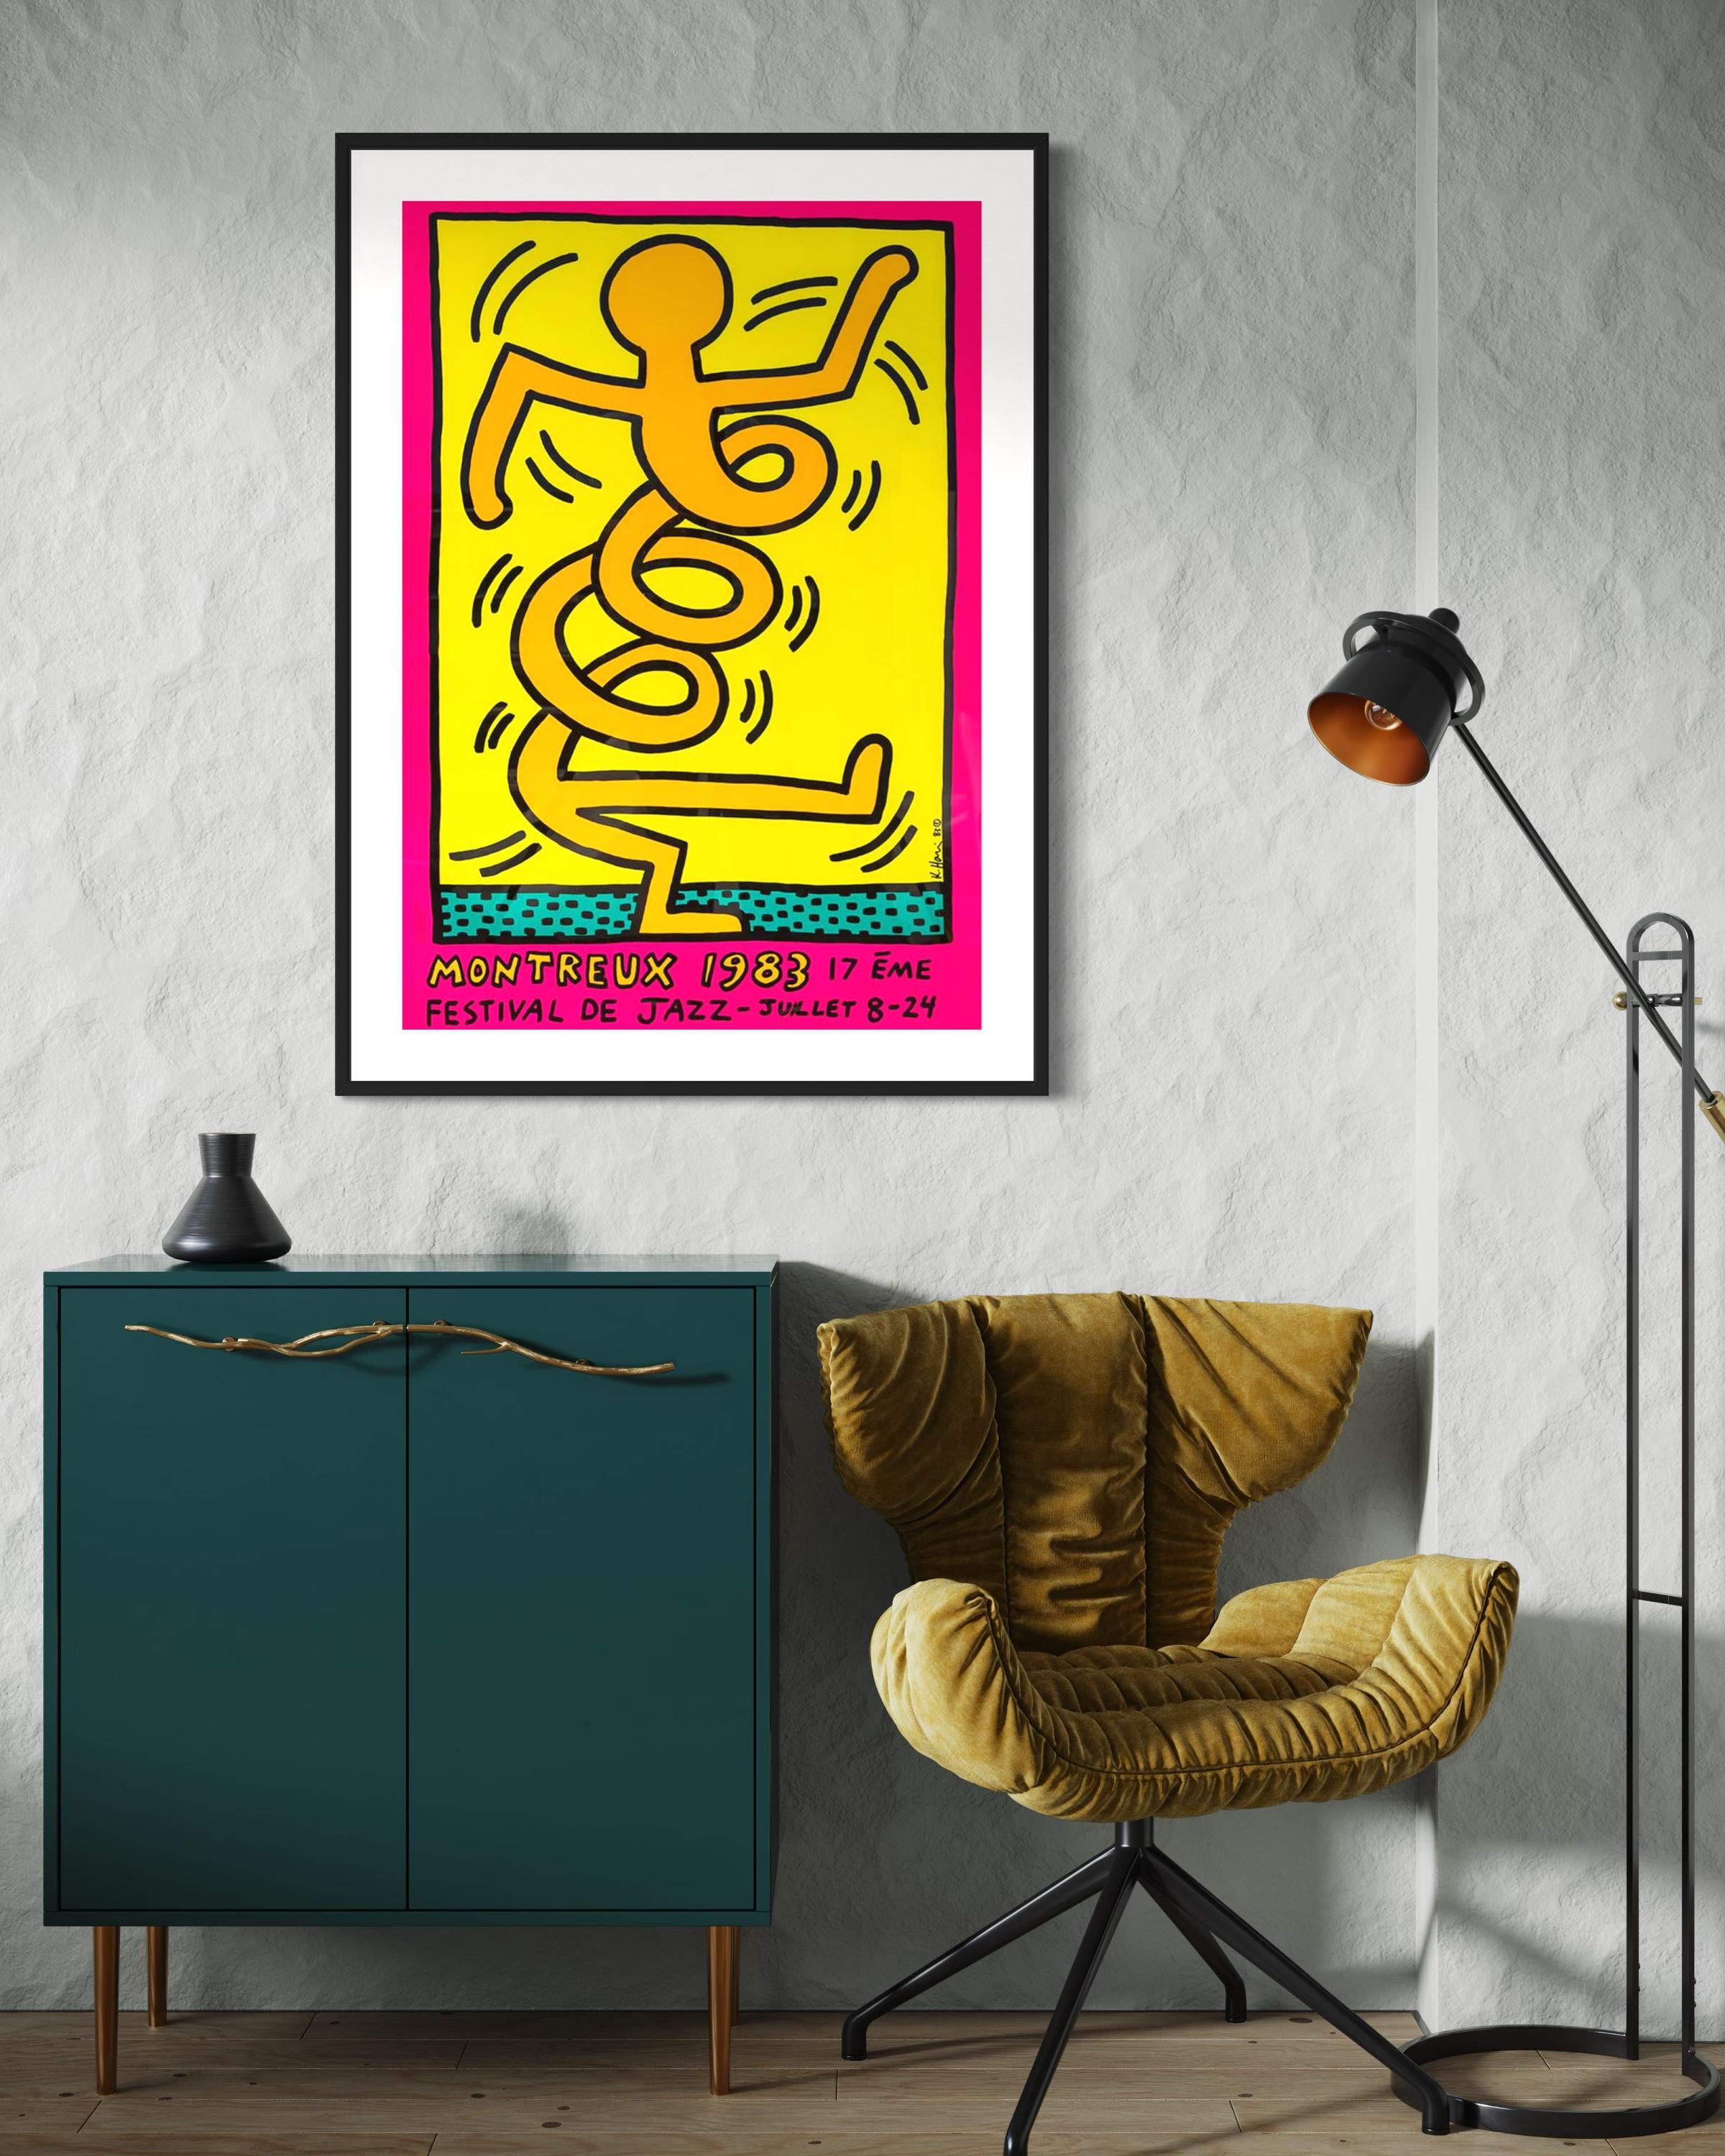 Title: Montreux Jazz Festival 1983 by Keith Haring 1986

Medium: Screenprint in colours on half-matte coated 250 gr paper

Printer: Albin Uldry

Size: 70 x 100 cm (27.6 x 39.4 in)

Signature: Plate signed by Keith Haring 

Open edition

Description: